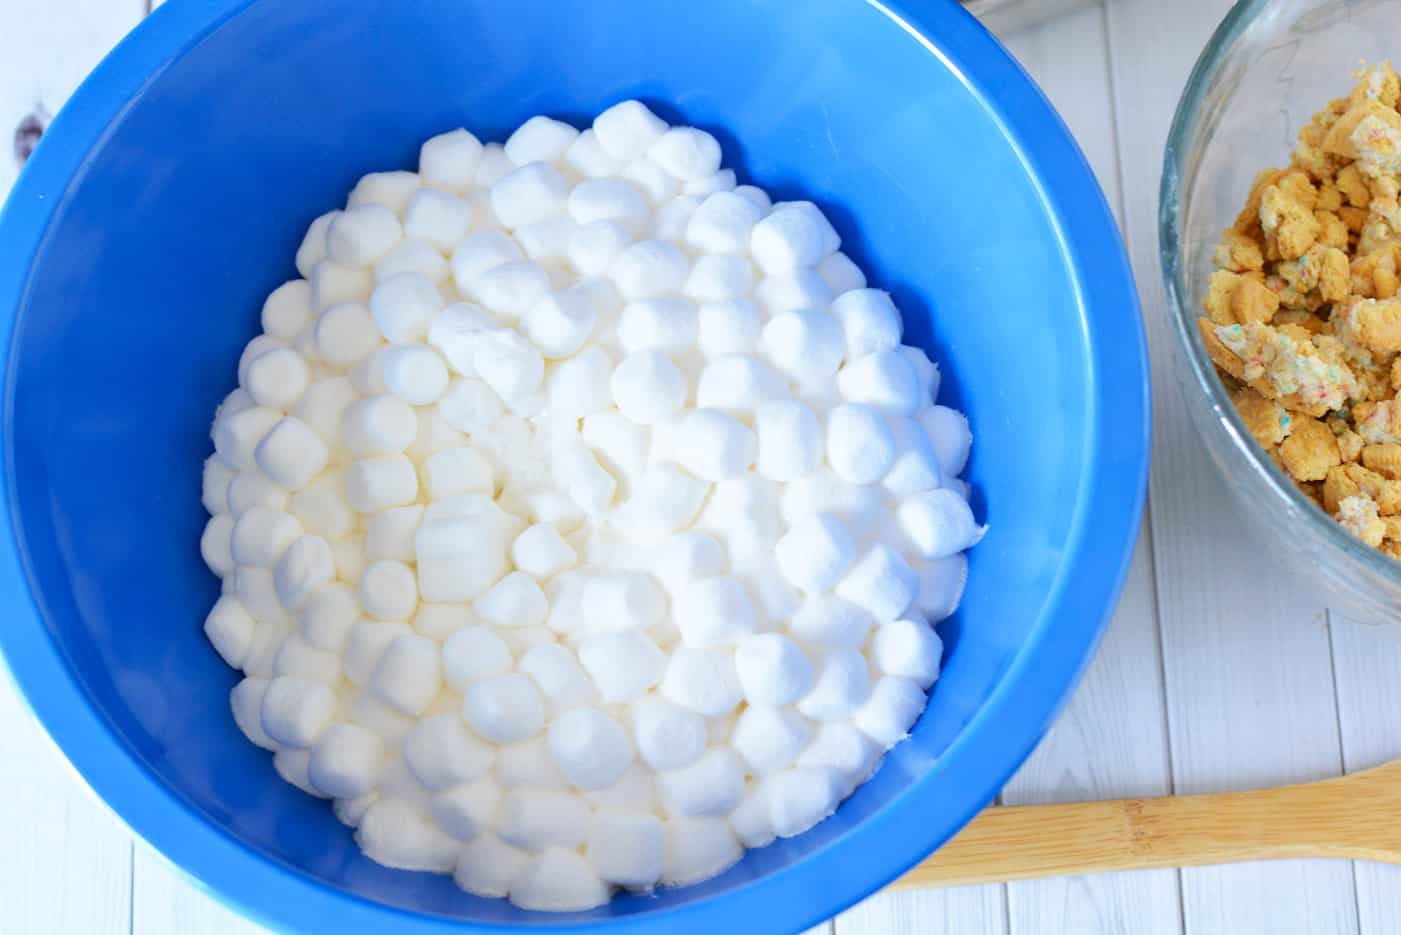 melted marshmallows in a blue bowl